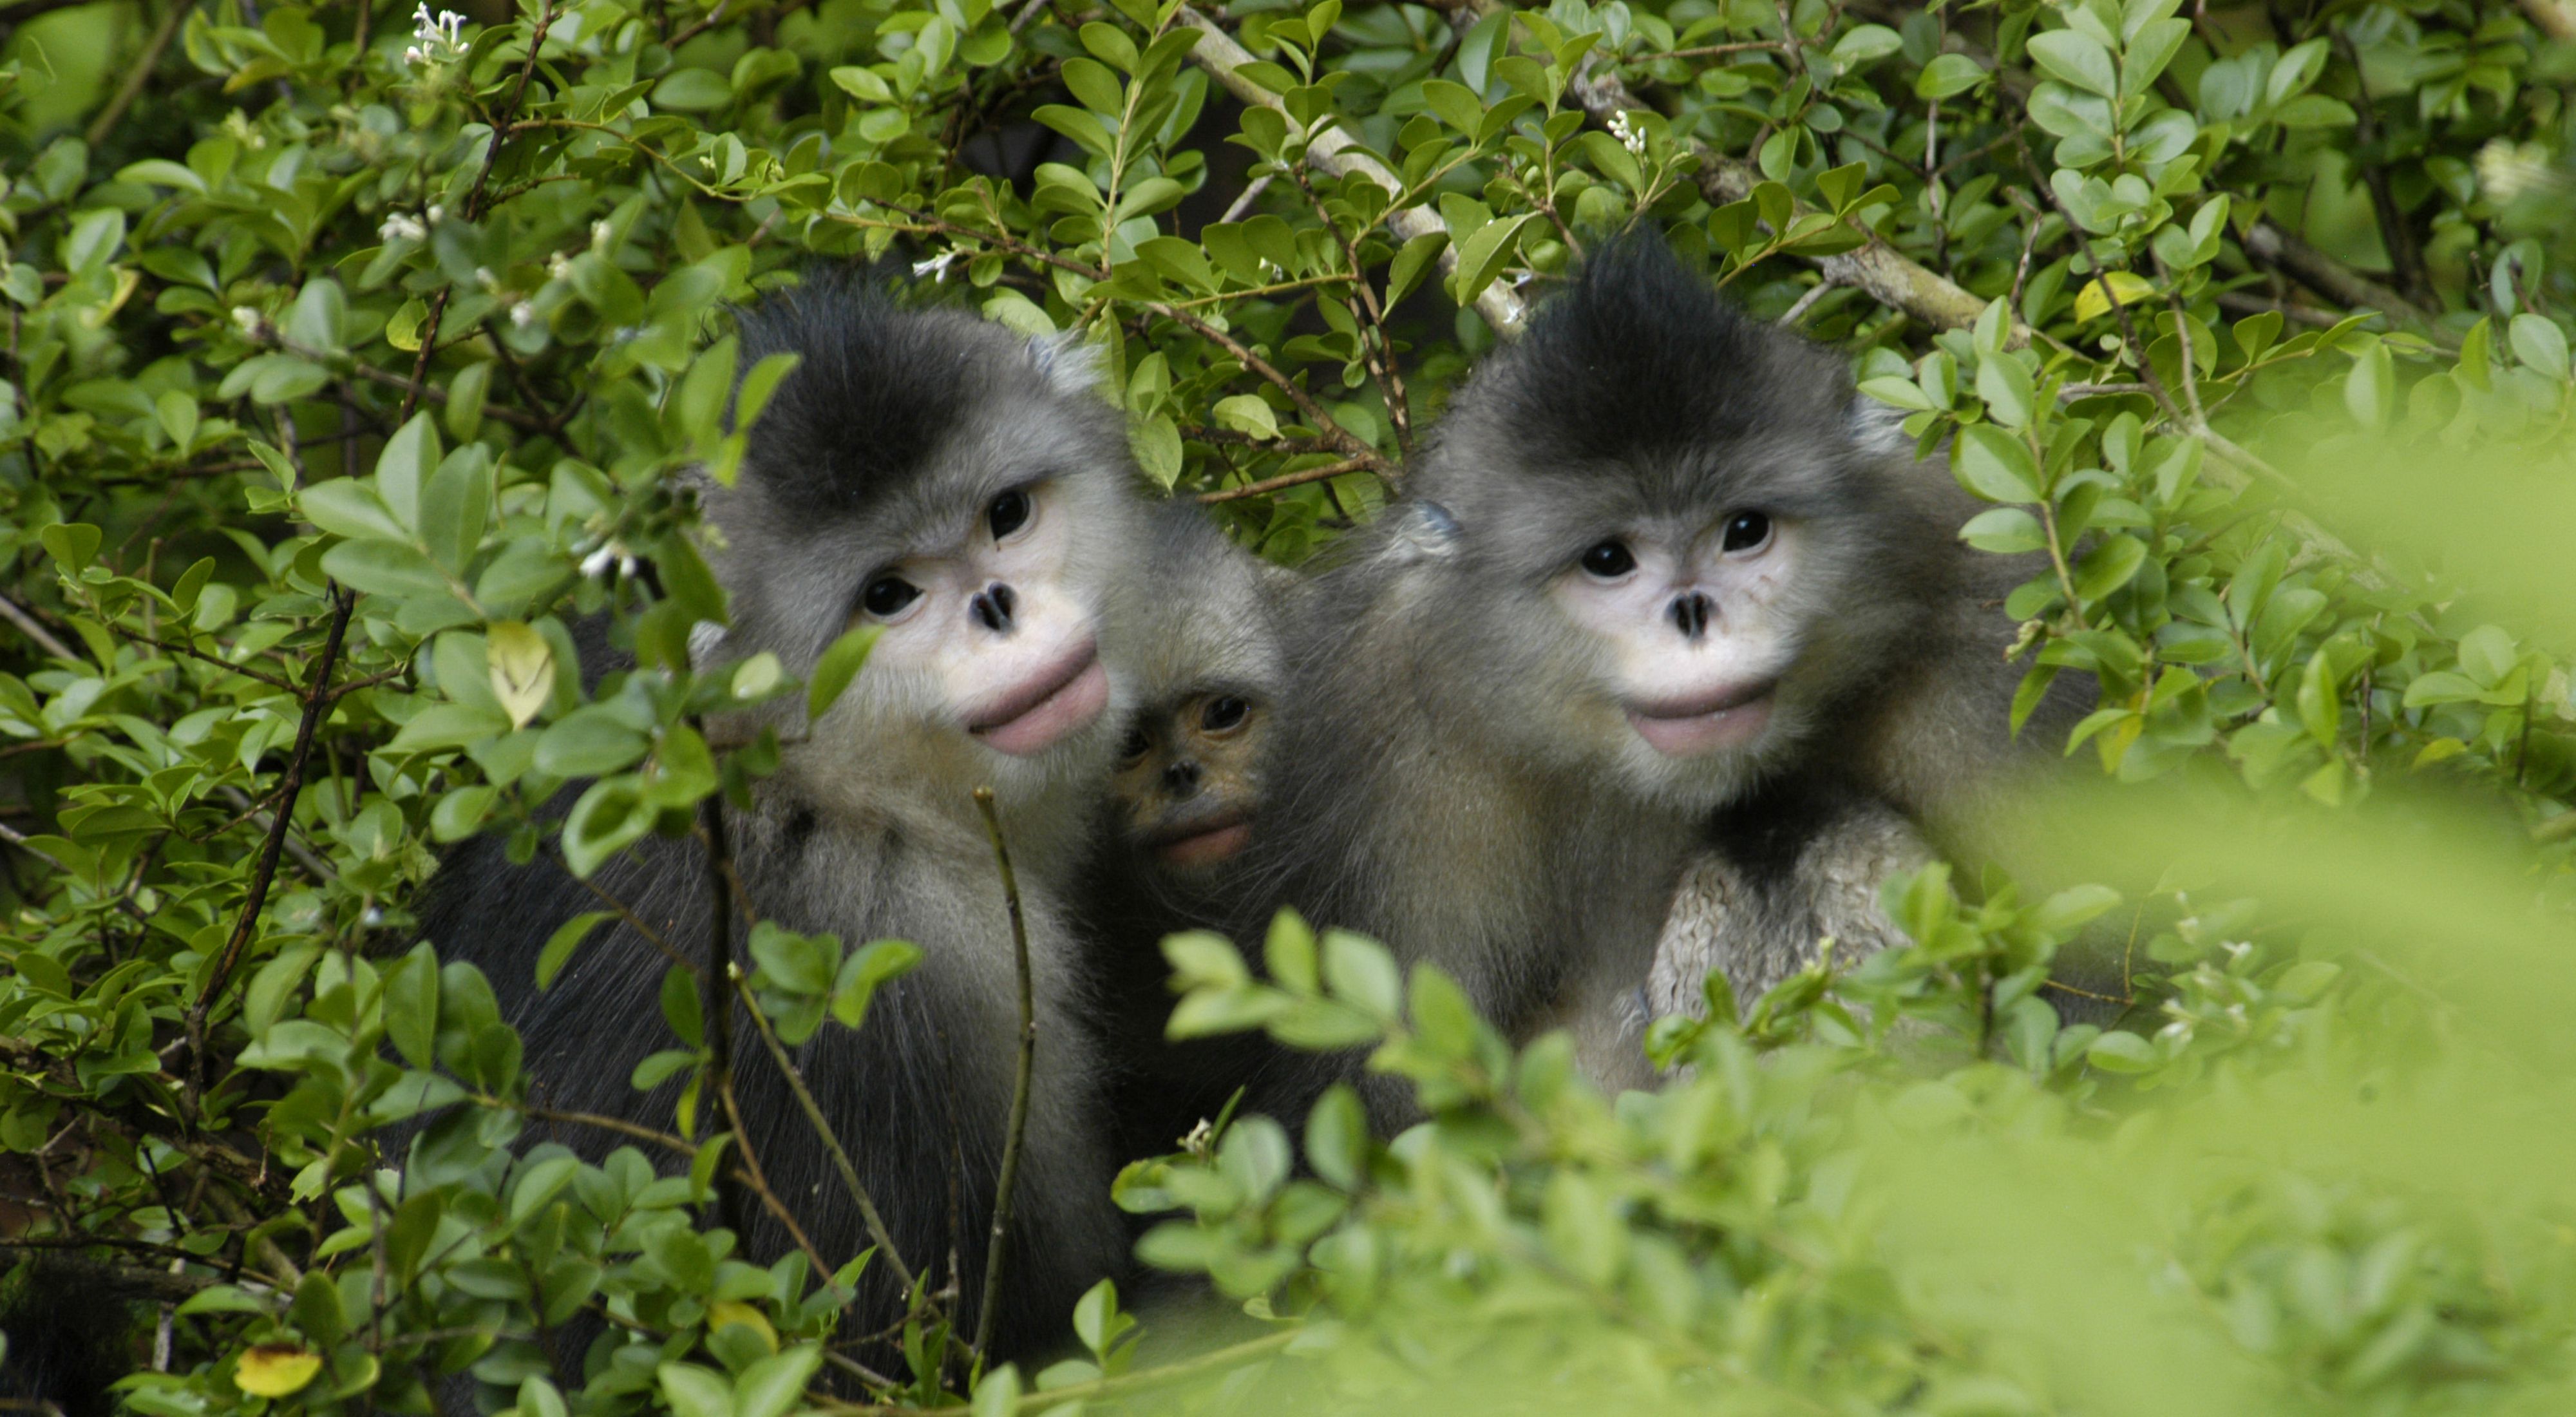 Forest protections in China aim to help the snub-nosed monkey